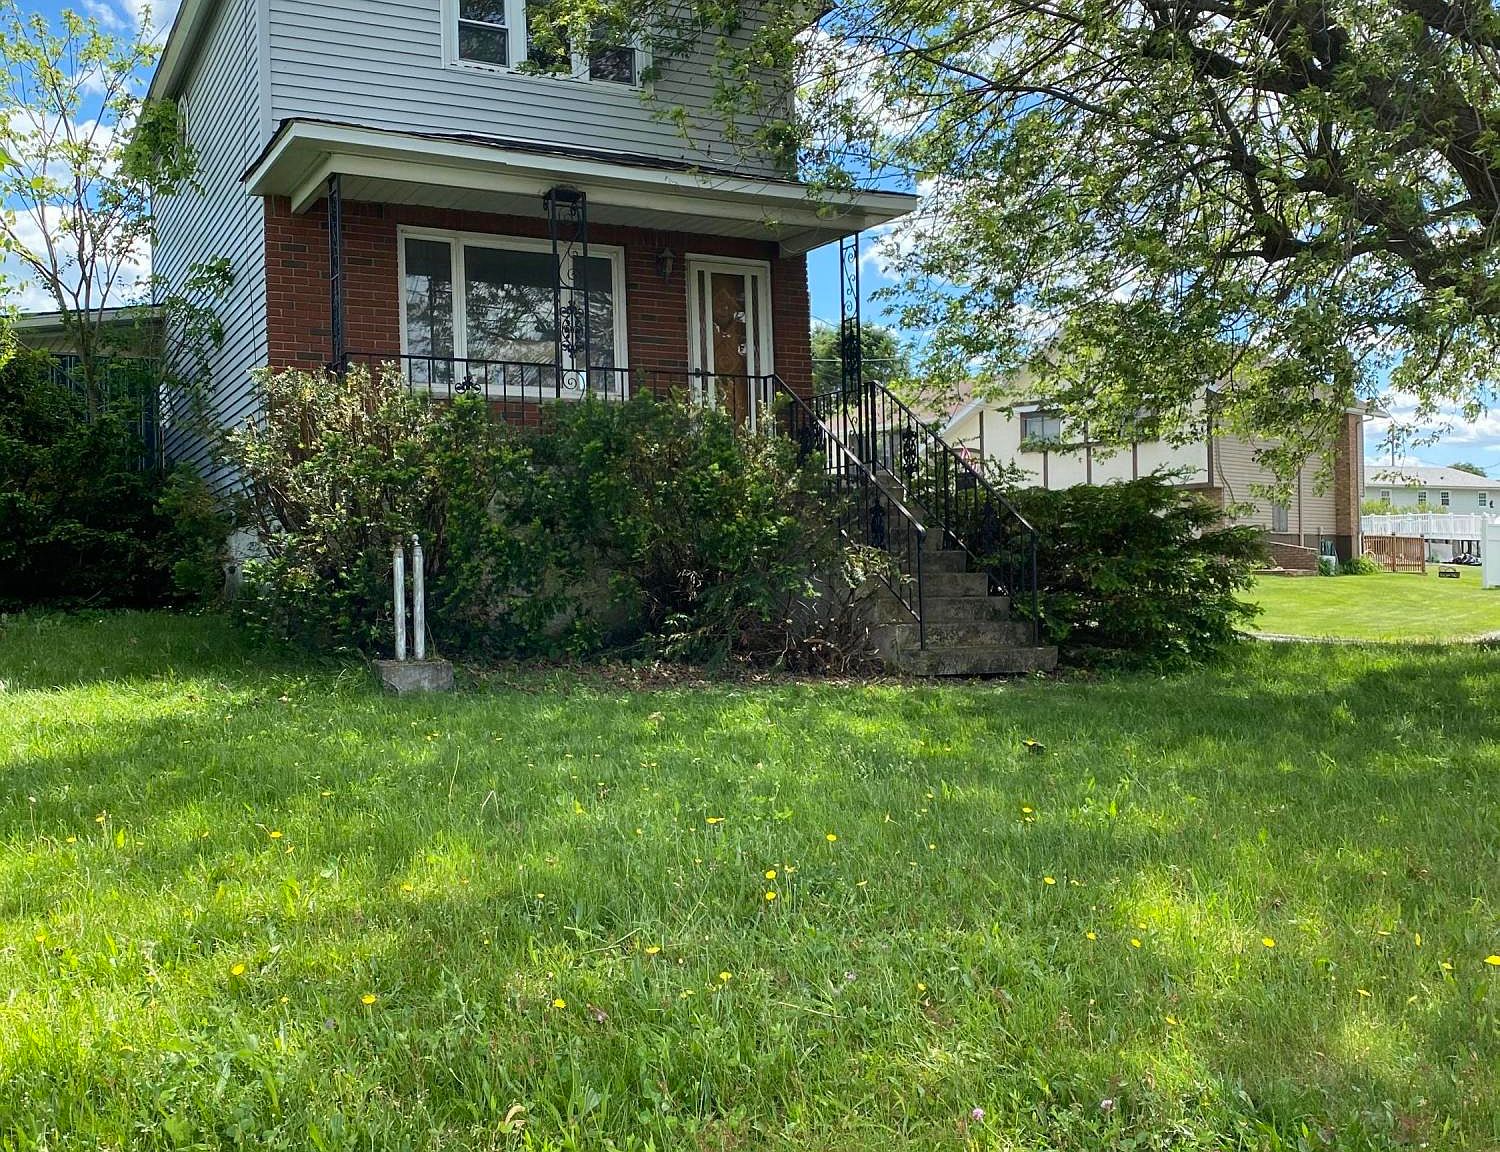 100 Swallow St, Olyphant, PA 18447 | Zillow